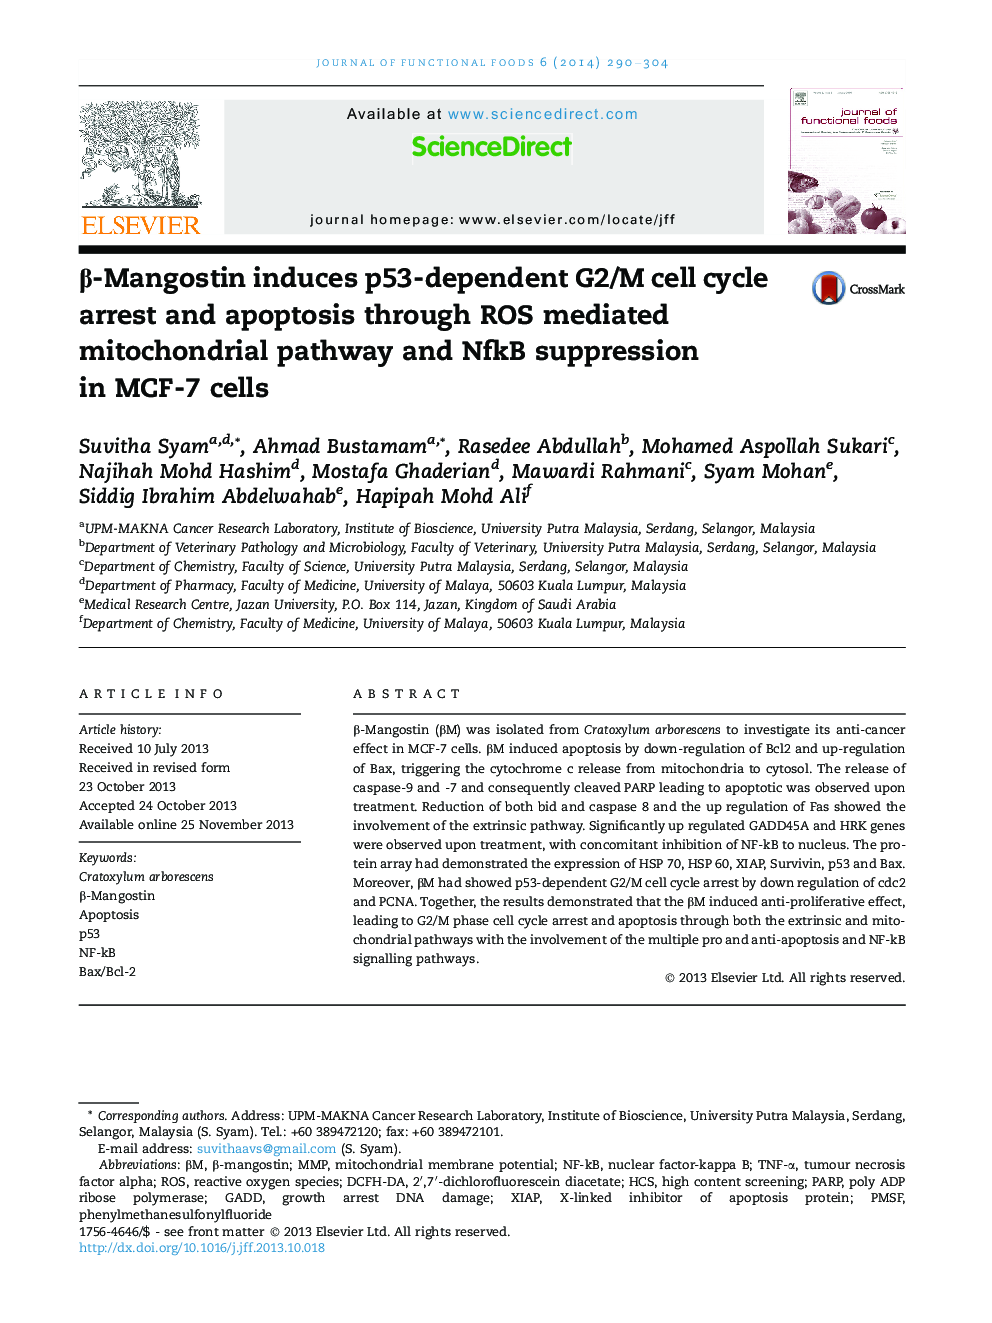 Î²-Mangostin induces p53-dependent G2/M cell cycle arrest and apoptosis through ROS mediated mitochondrial pathway and NfkB suppression in MCF-7 cells